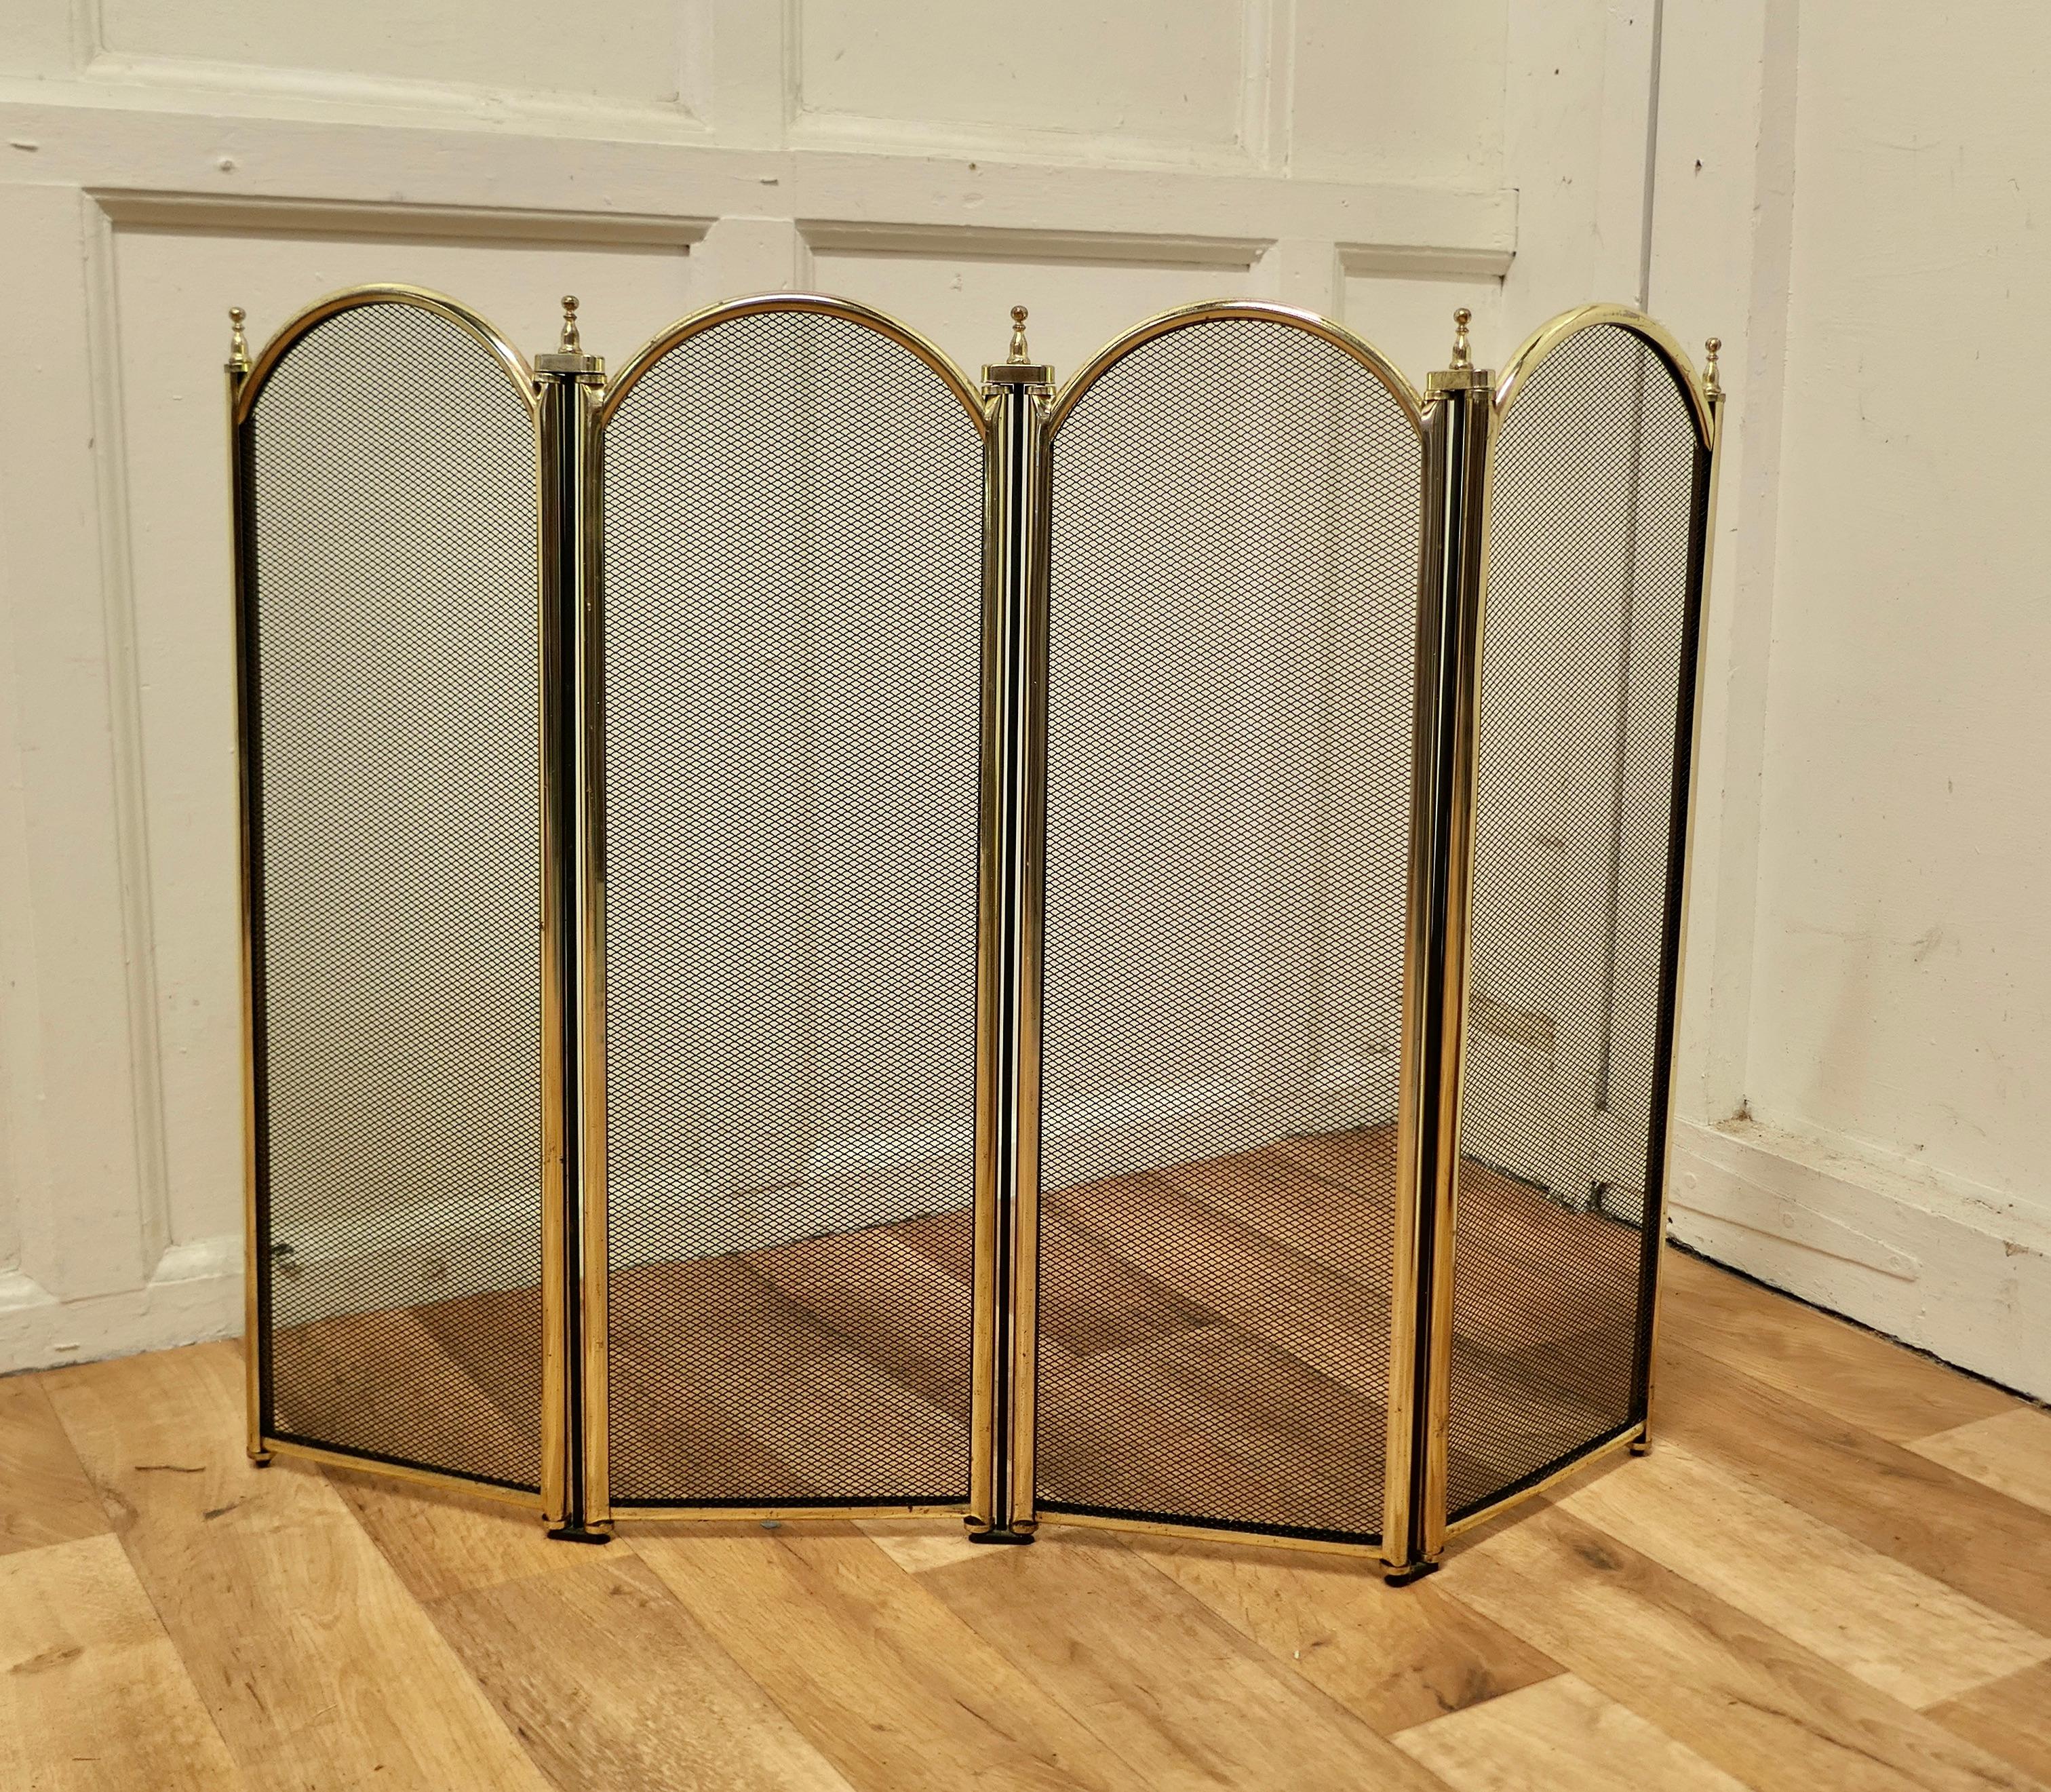 Large folding brass and iron fire guard for Inglenook Fireplace.

This very useful spark guard has a 4 fold brass frame and a fine black mesh infill decorated with brass finials along the top. 
When opened out the screen can be shaped to enclose